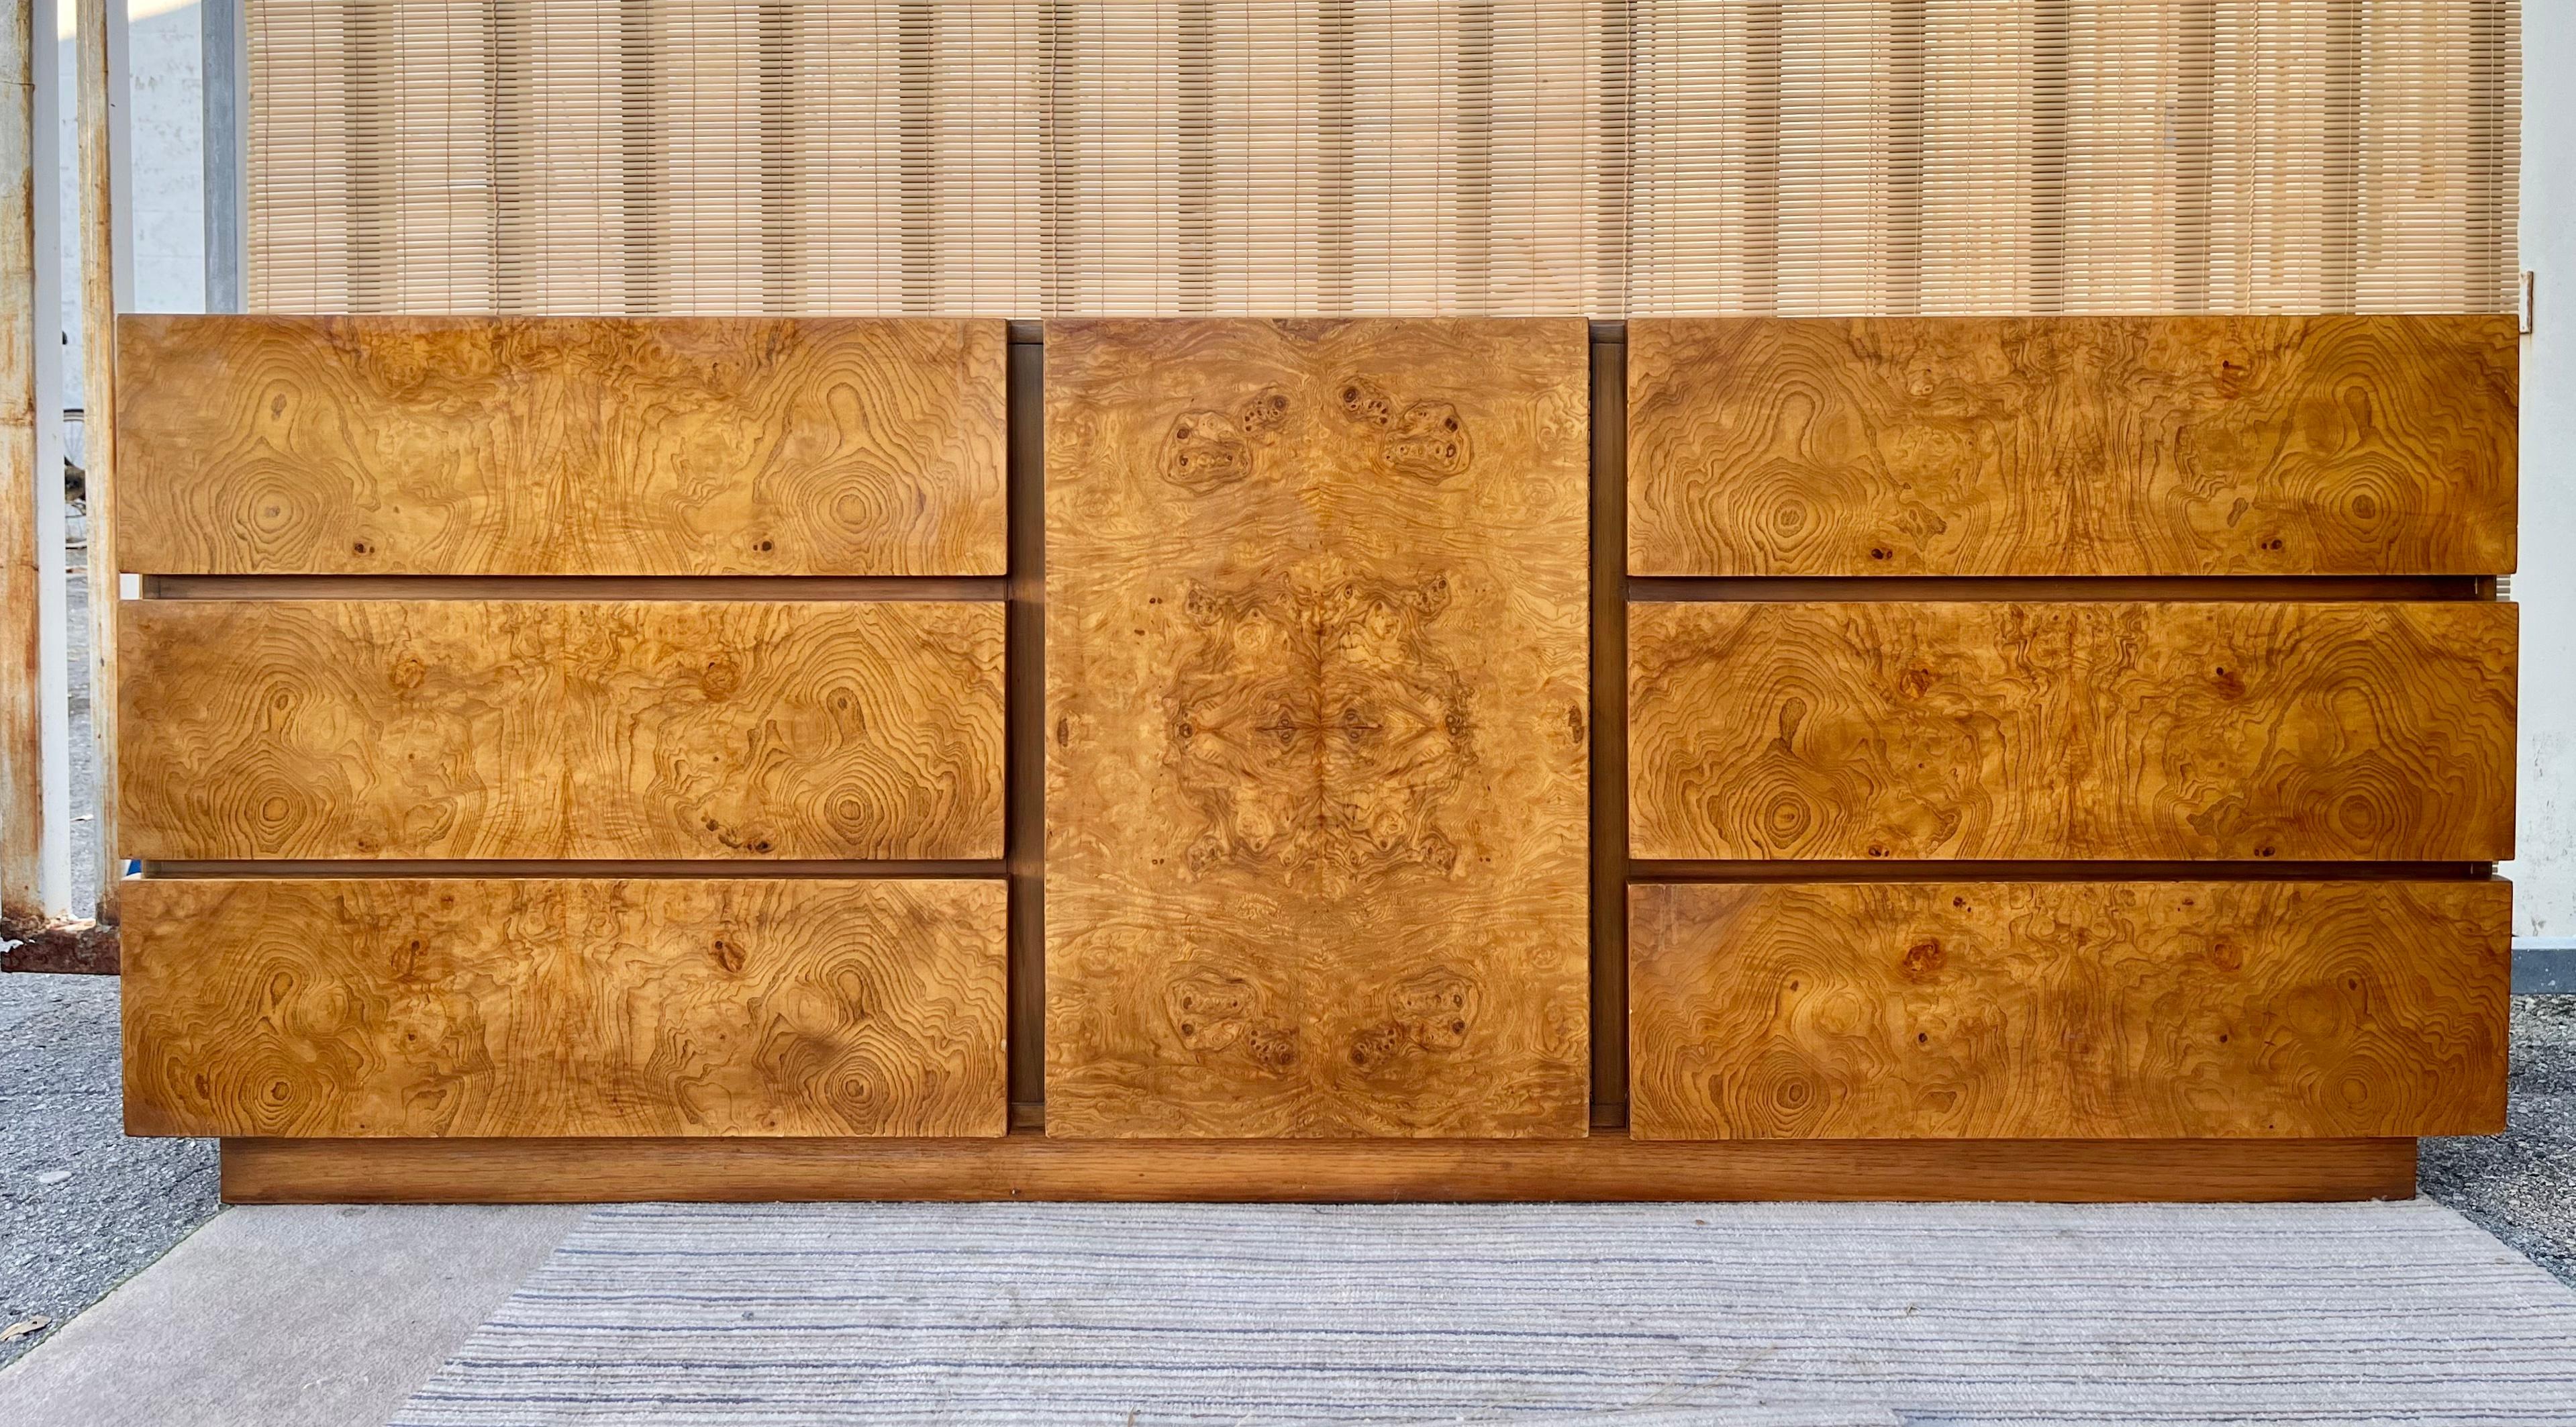 Mid Century Modern Brutalist Burl Wood 9 Drawers Dresser originally designed by Roland Carter for Lane Furniture, . Manufactured in 1971
Features a sleek minimal design with beautiful olive burl wood veneer. With three large drawers at both sides a